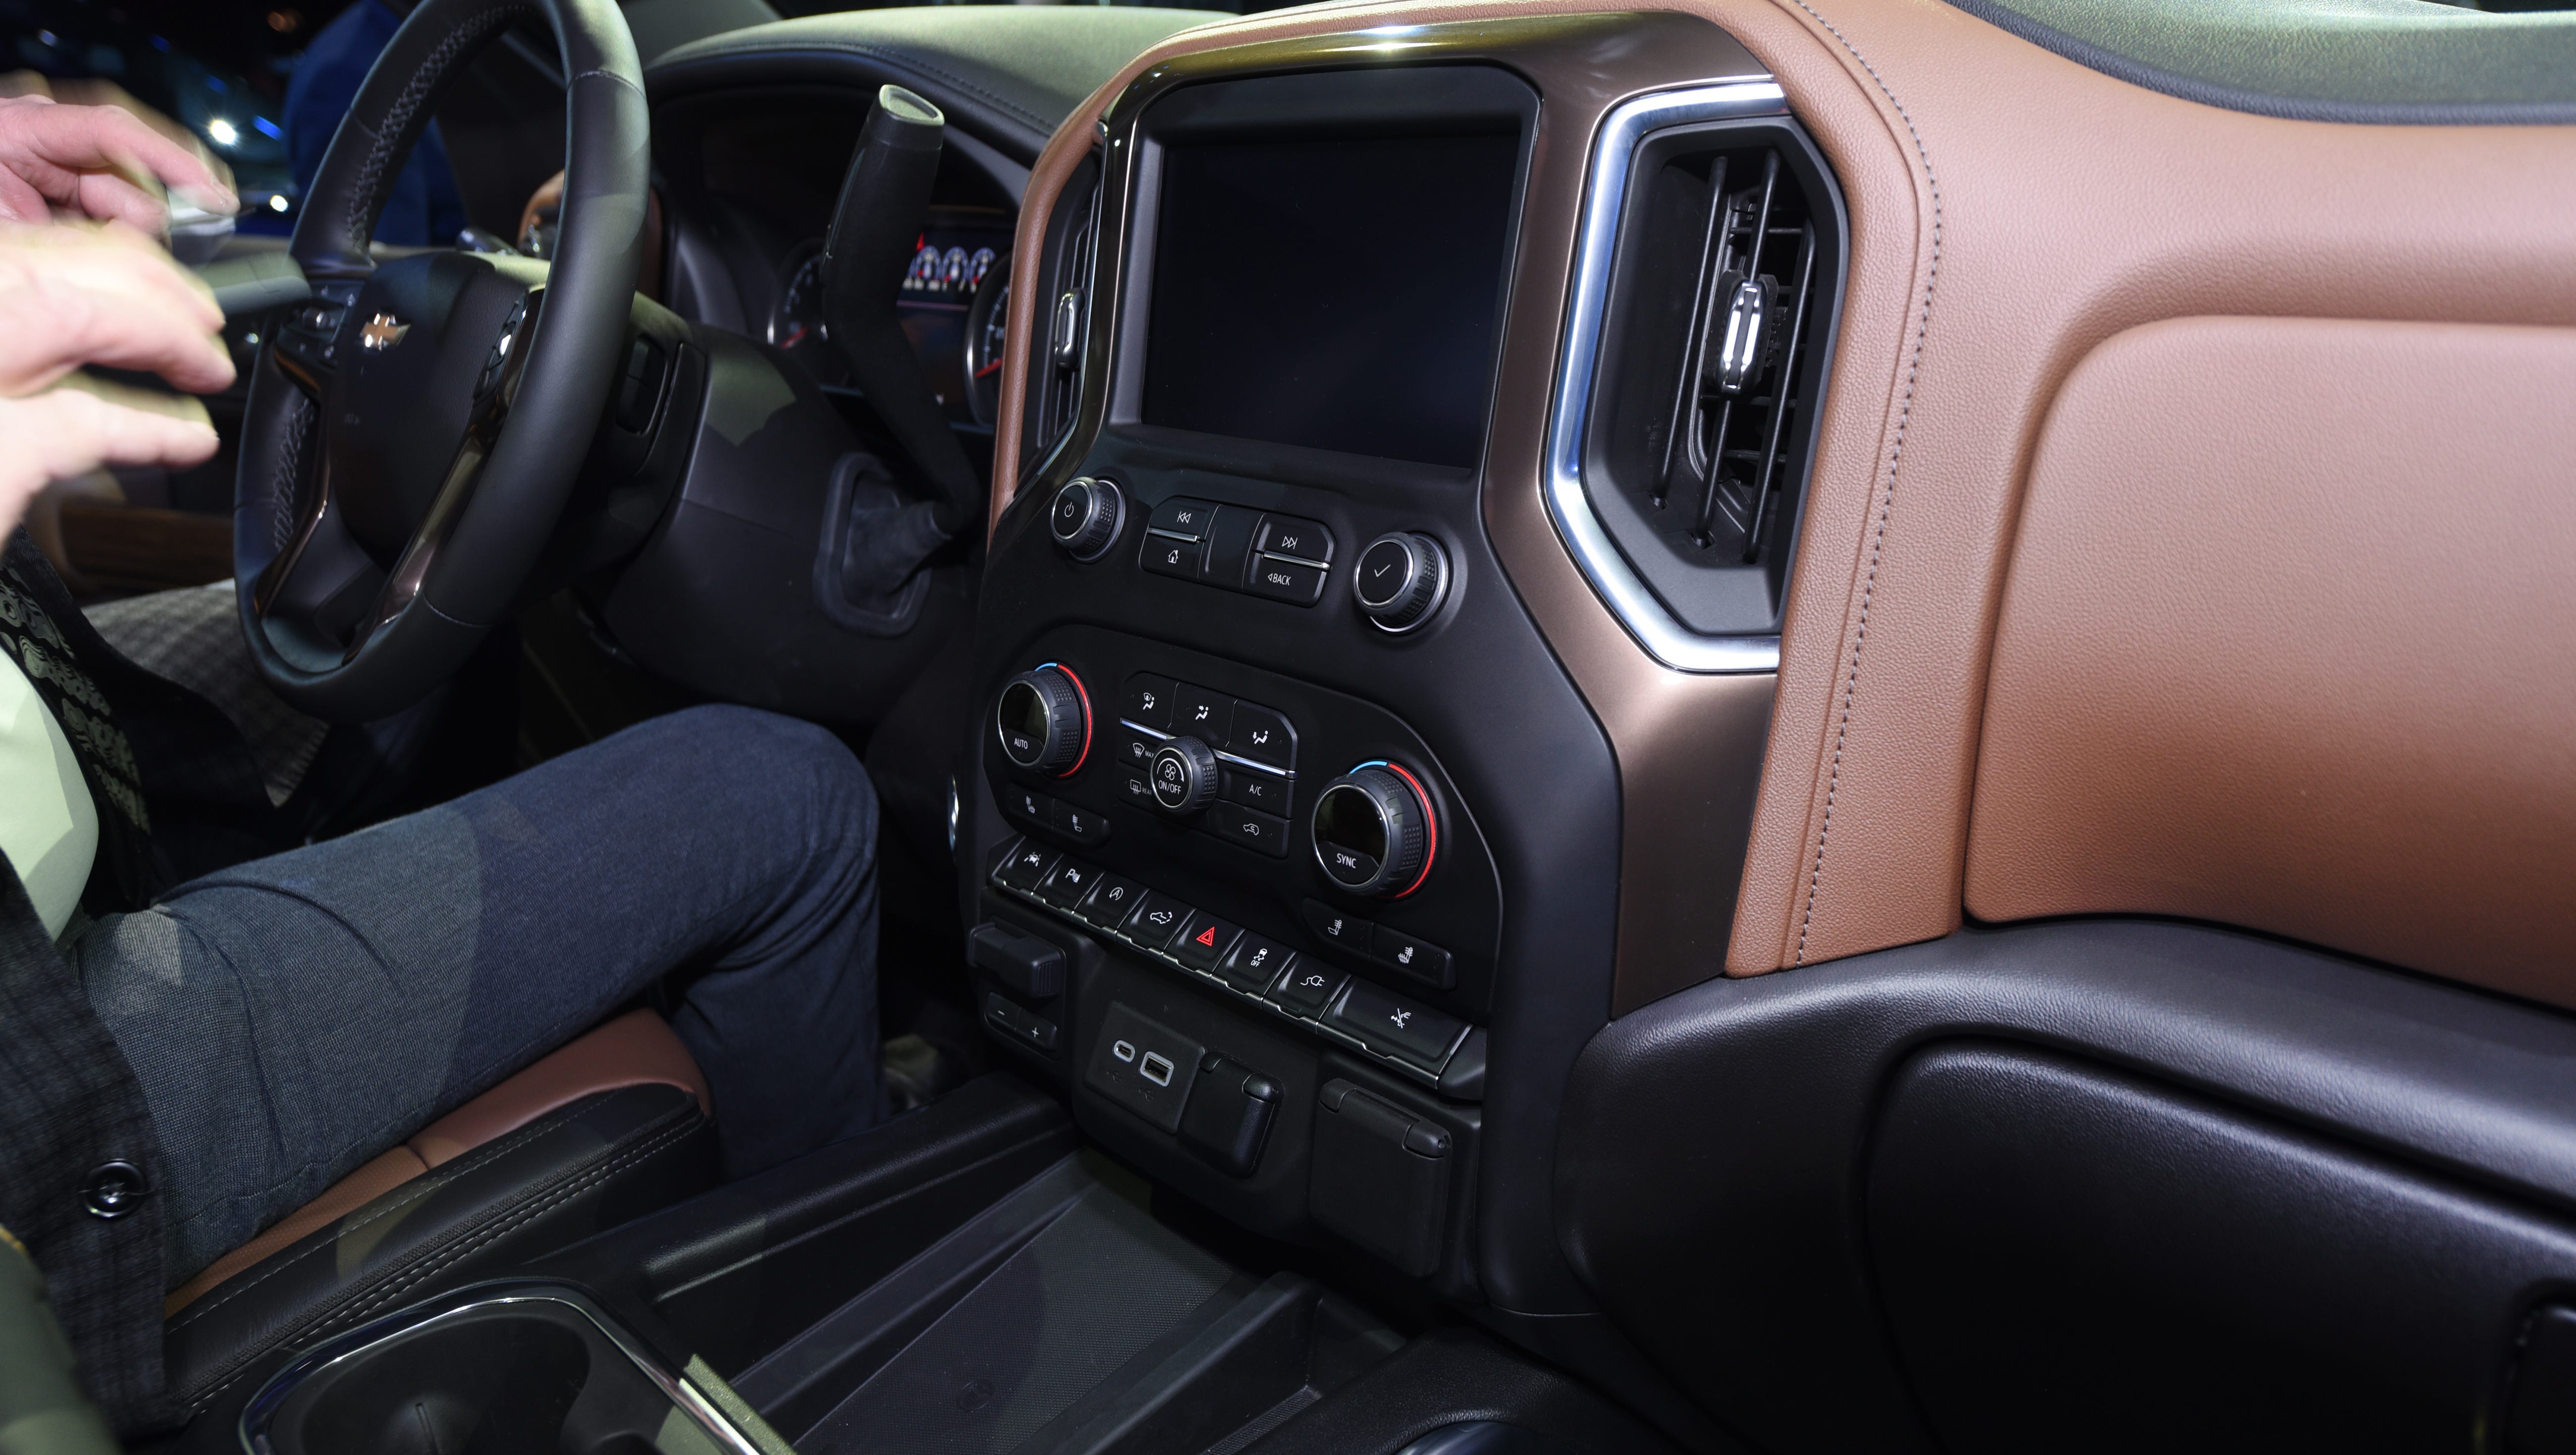 The 2019 Chevy Silverado High Country's new console and interior.